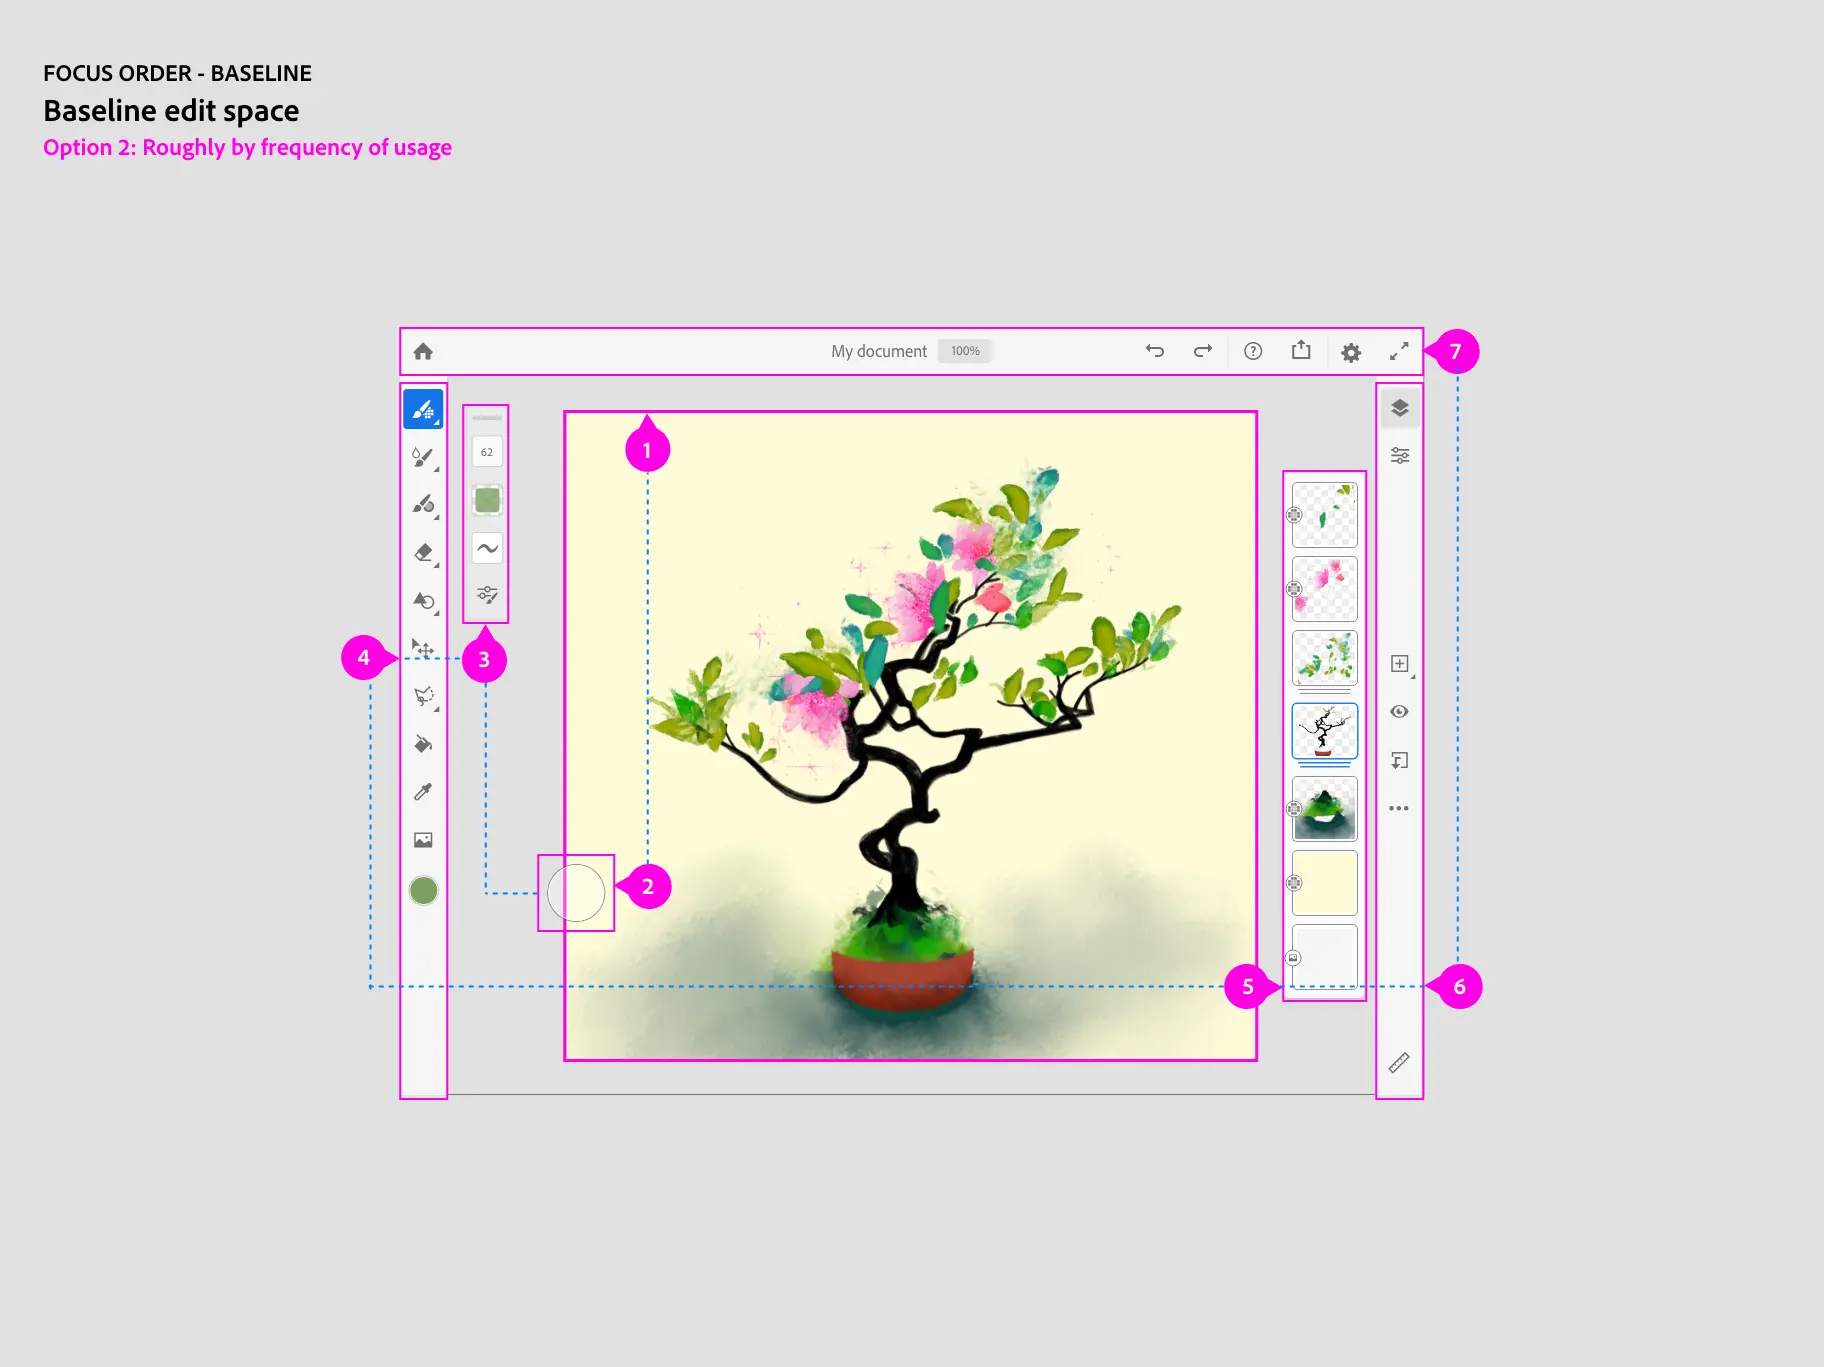 Fresco's main editing space with tools labeled sequentially; in the background a drawing of a potted camellia with a dark trunk, green/teal leaves, and pink flowers.